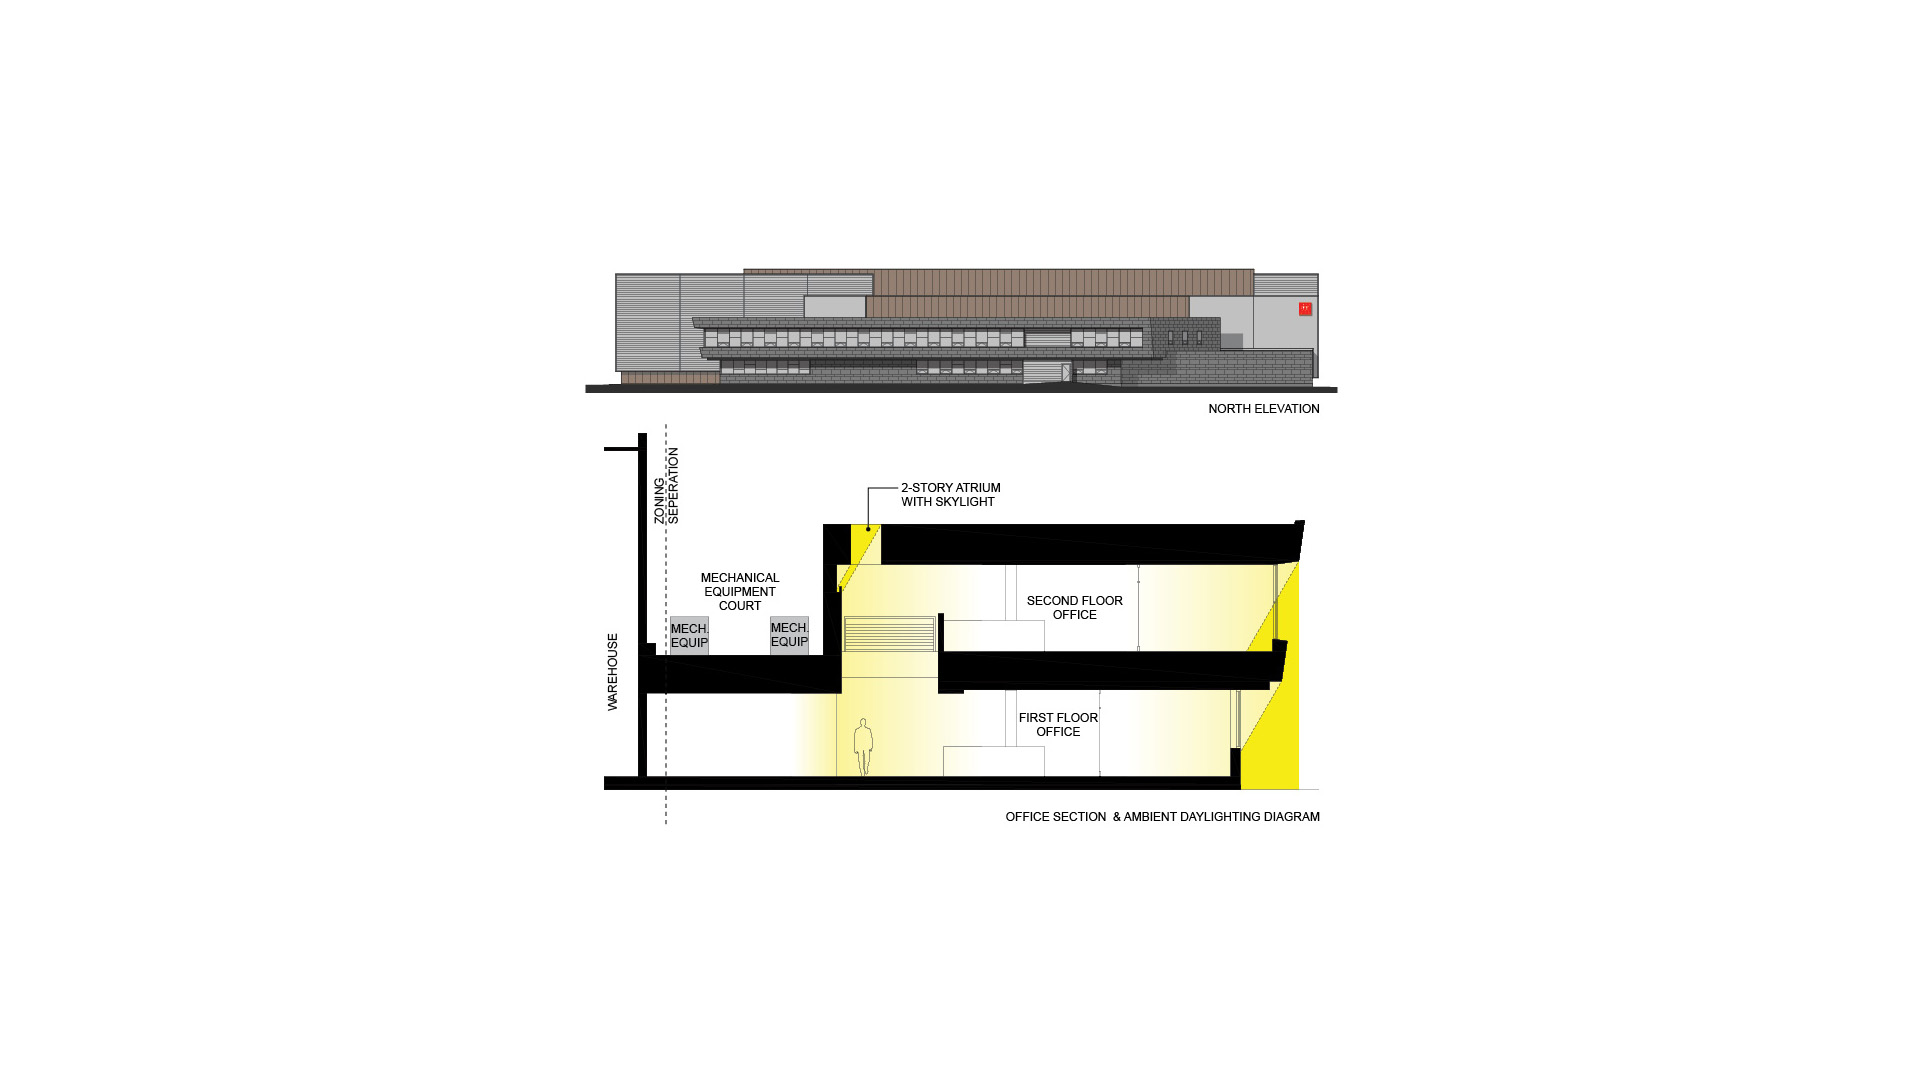 Zwilling J.A. Henckels USA Headquarters office section & ambient daylighting diagram